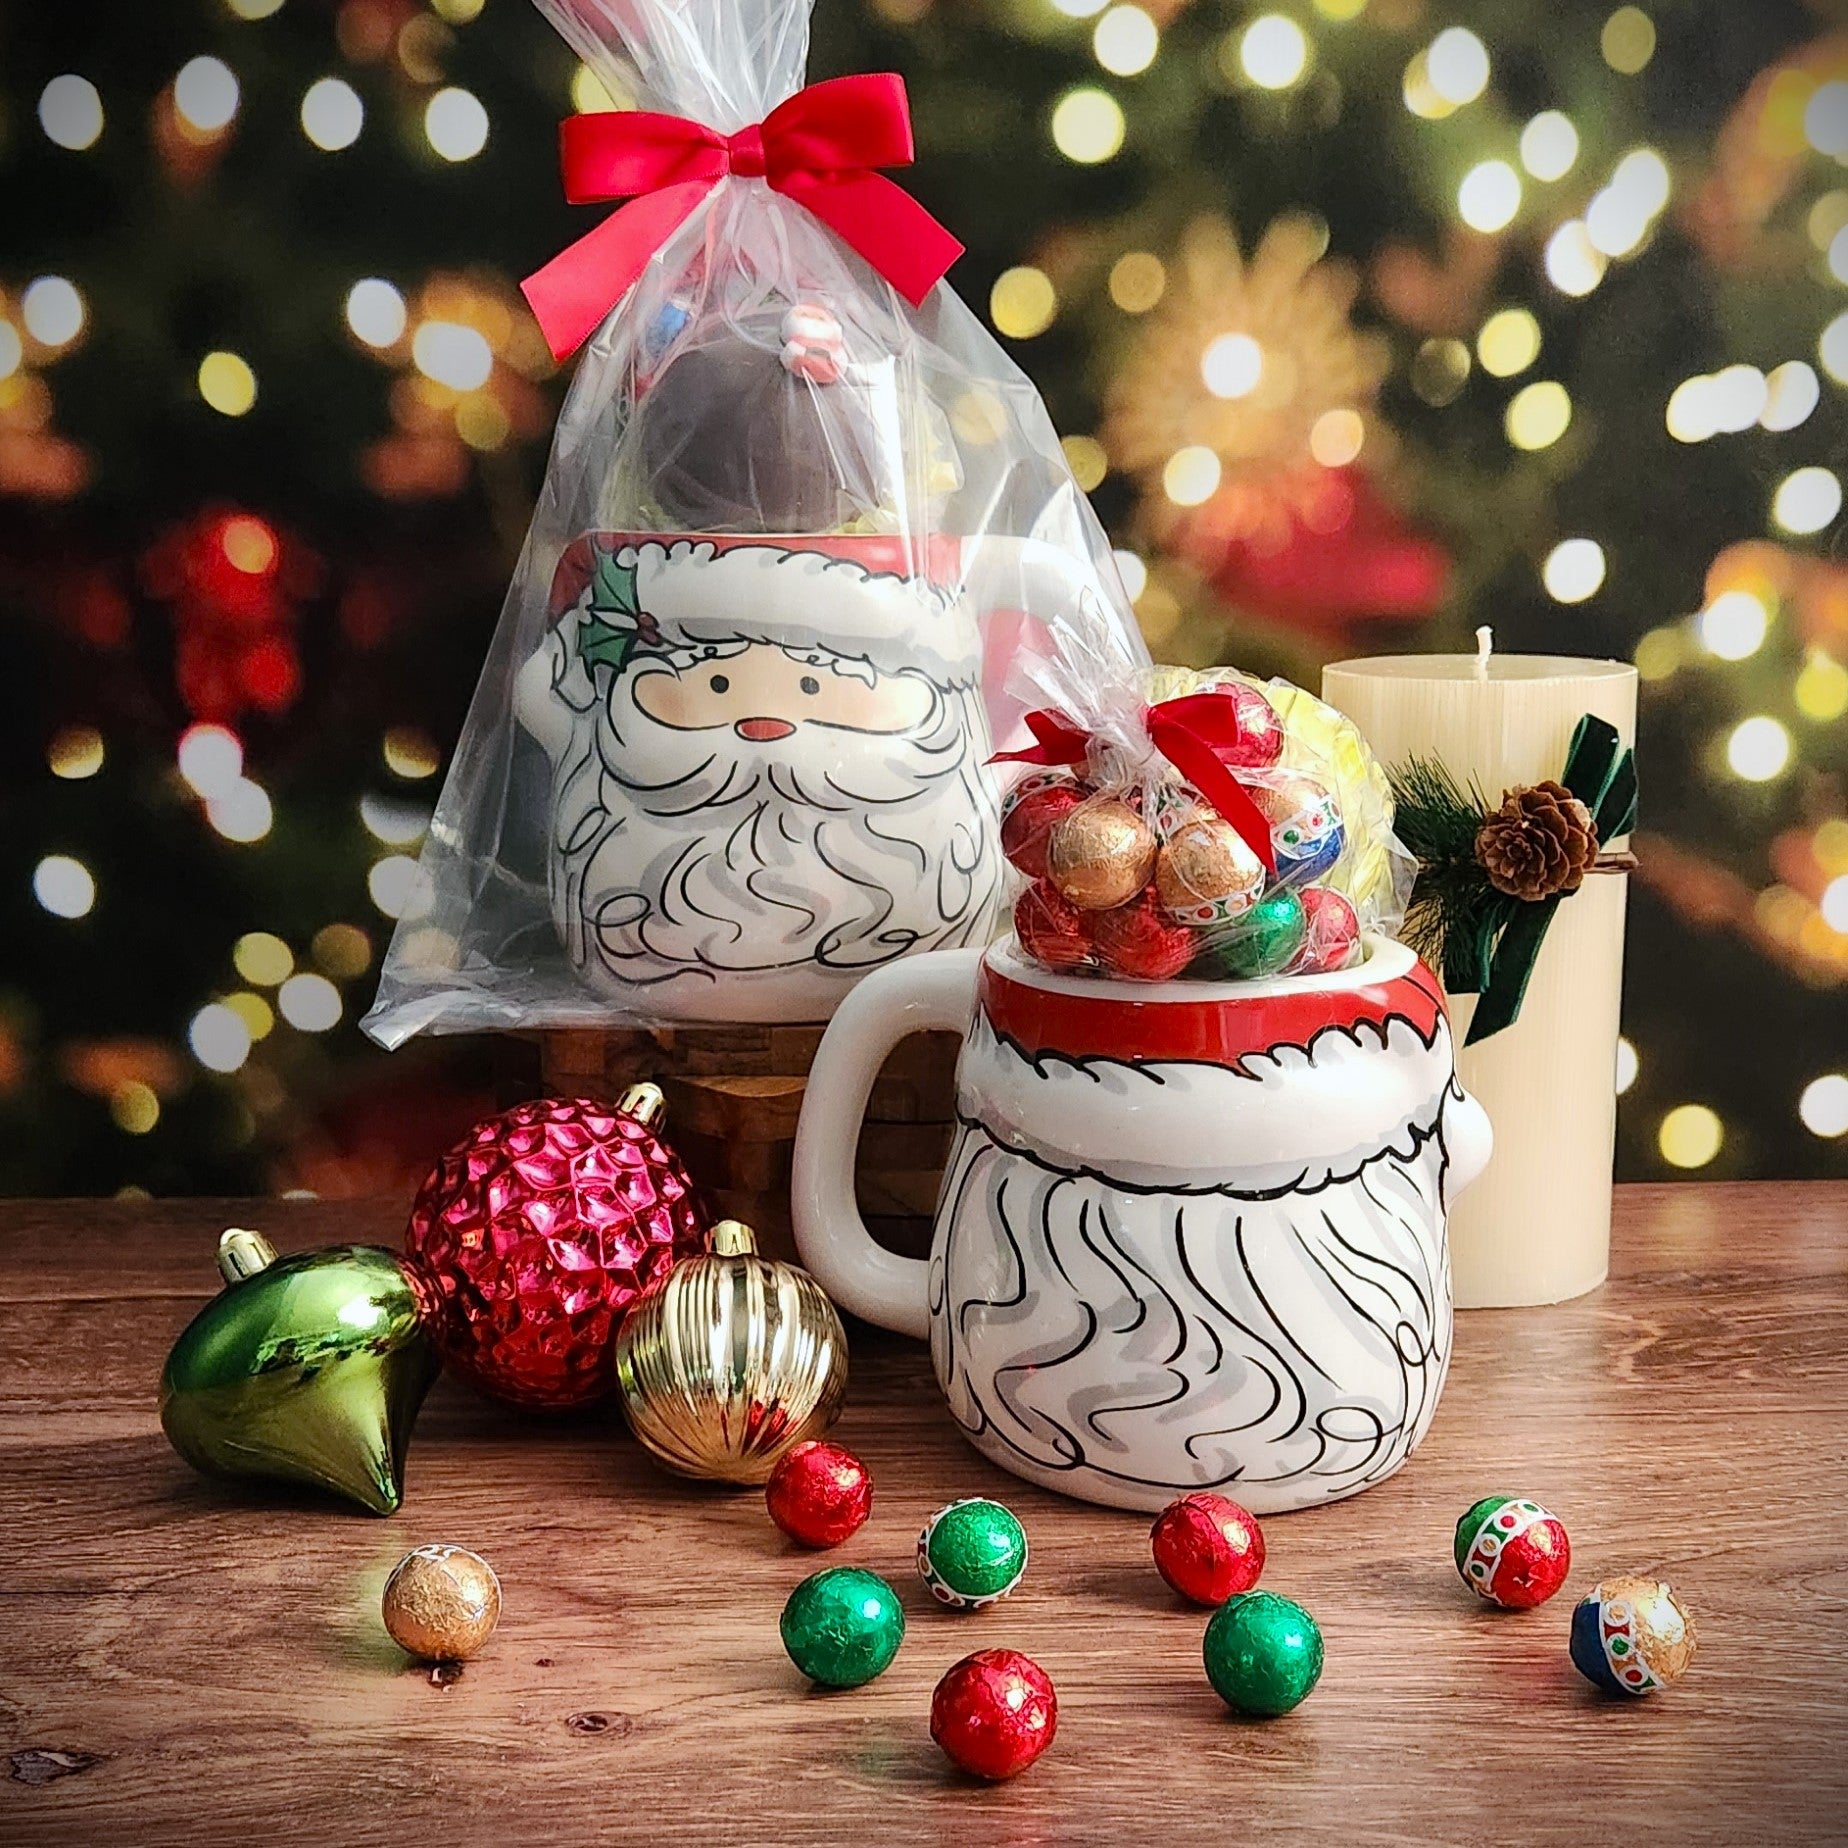 Enjoy hot cocoa with marshmallows in this delightful ceramic mug adorned with a Santa Face. Complete with a Milk Chocolate Hot Cocoa Bomb and Foiled Ornaments, it's the perfect gifting option, all wrapped up with a bow!